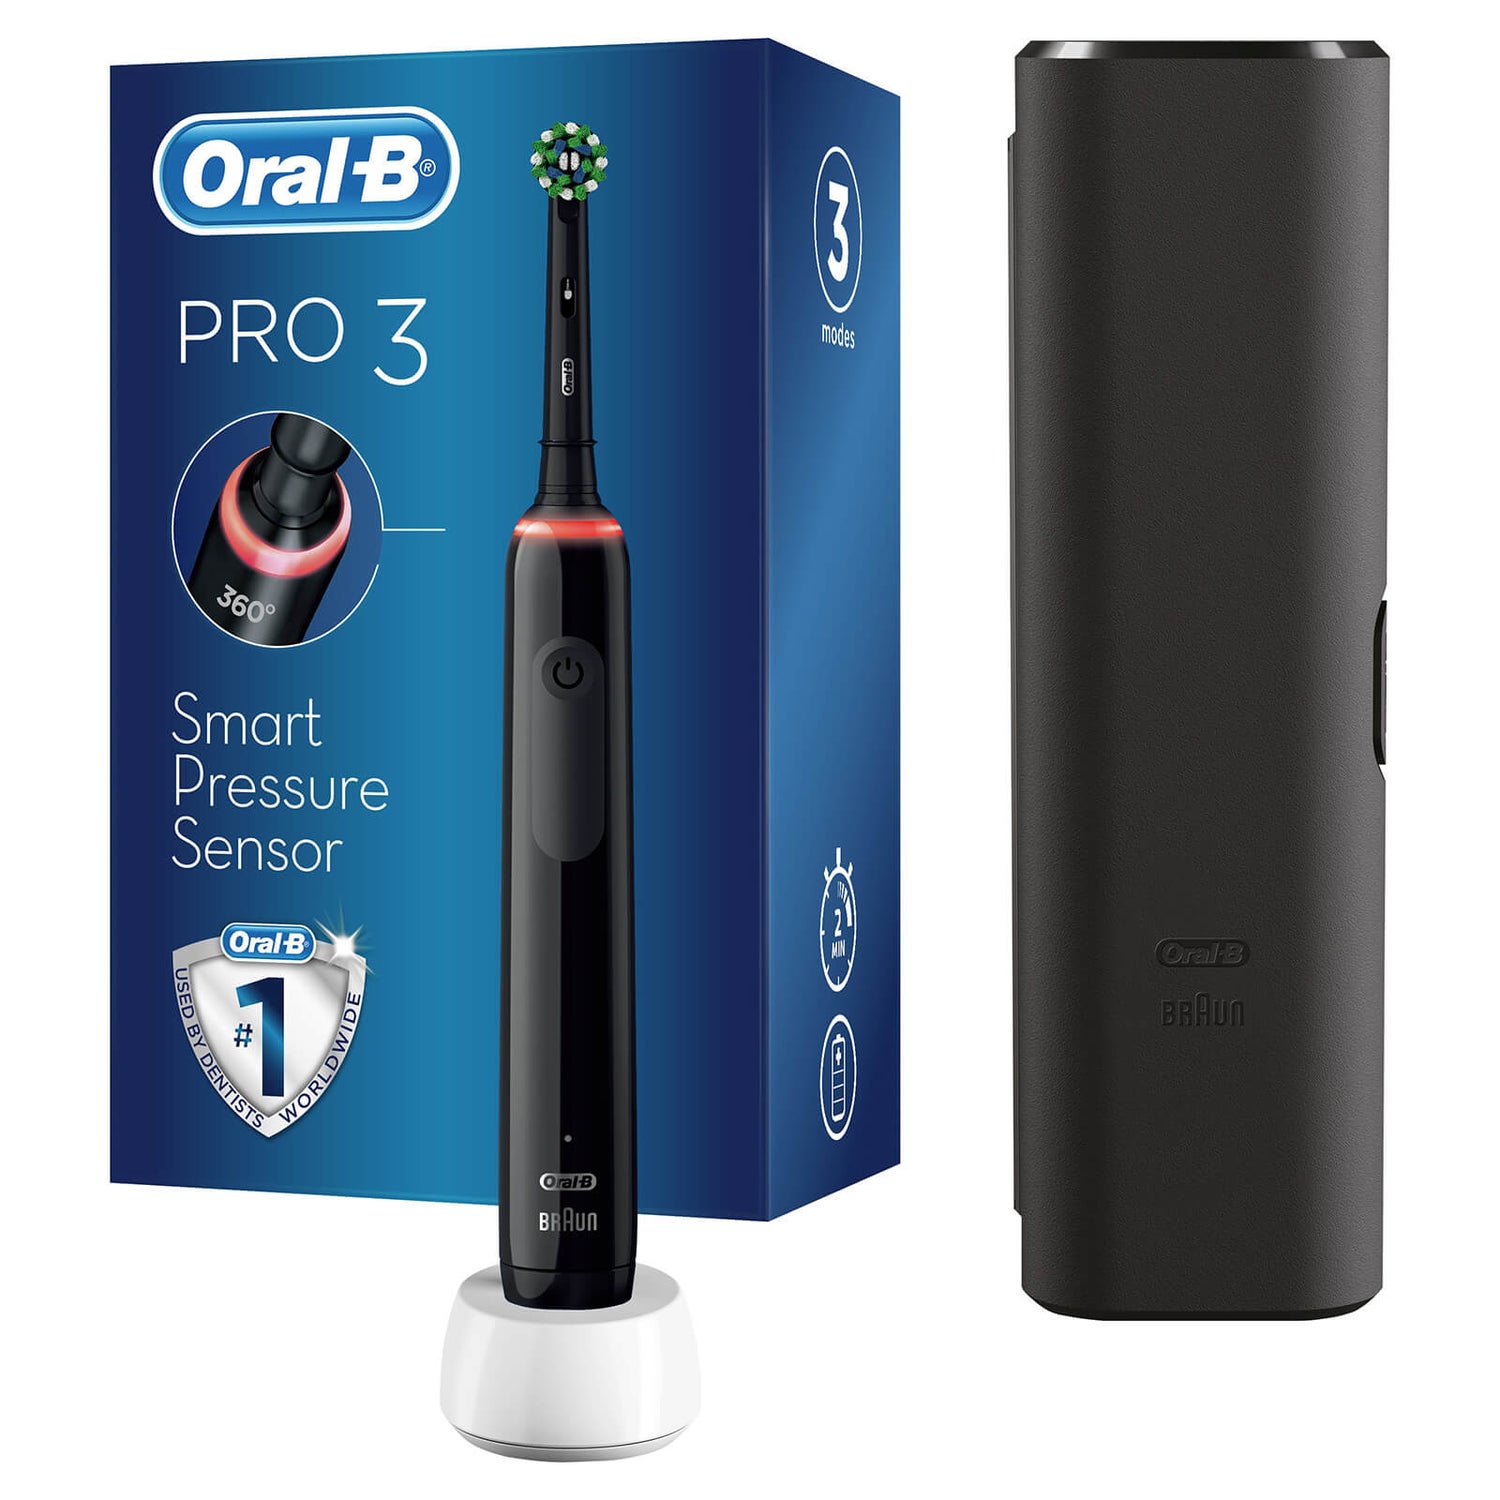 Oral-B Pro 3500 Cross Action Black Electric Toothbrush with Travel Case